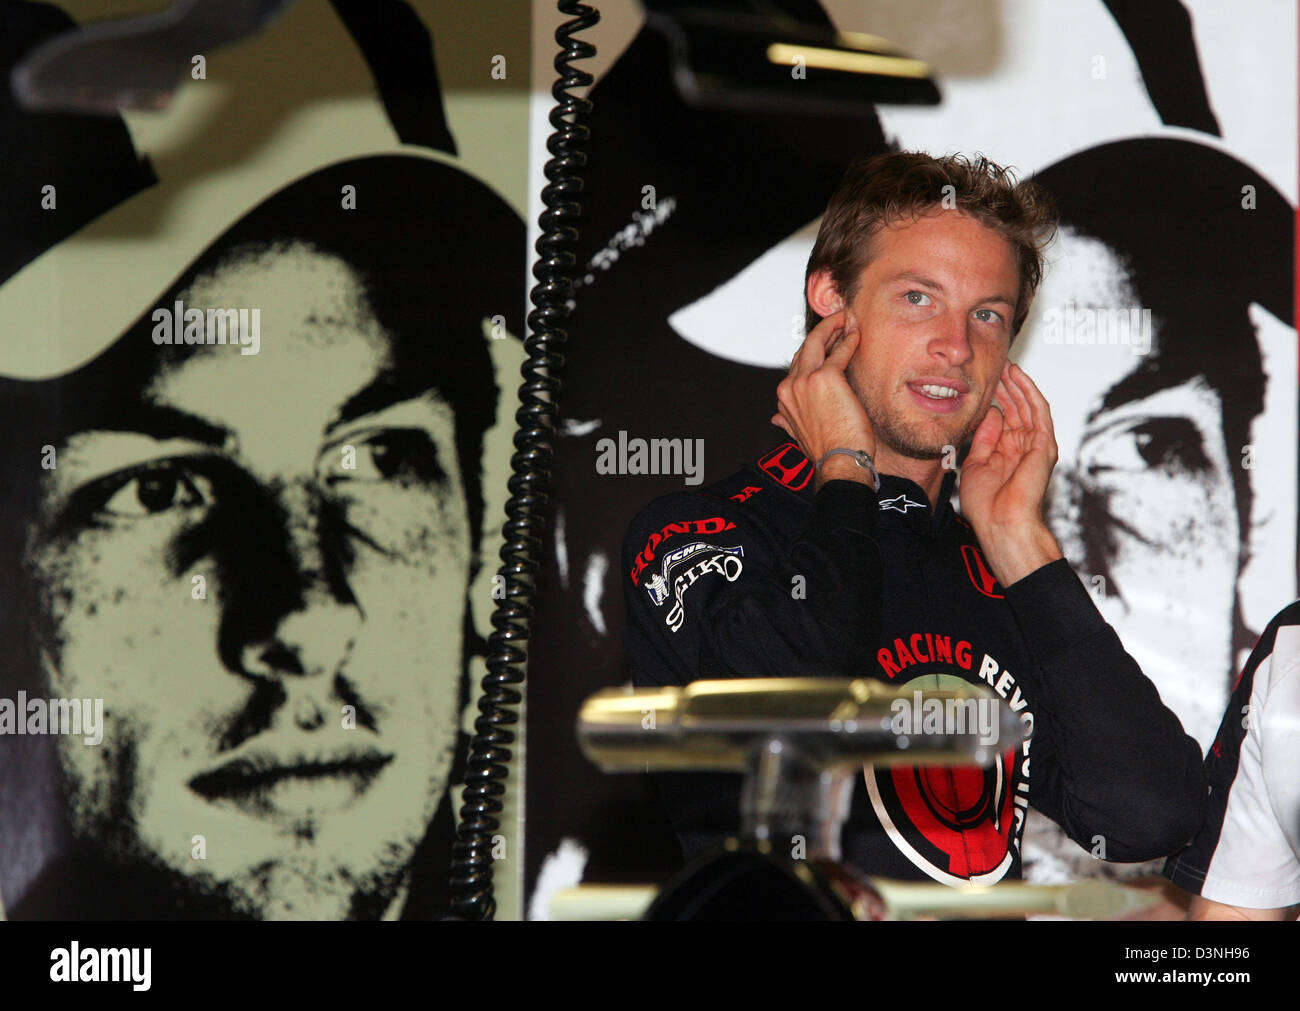 British Formula One pilot Jenson Button of Honda Racing F1 team protects his ears in his garage during the practice session to the 2006 FORMULA 1 Grand Prix of Spain at the race track Circuit de Catalunya in Montmelo near Barcelona, Spain, Saturday, 13 May 2006. The 2006 FORMULA 1 Grand Prix of Spain takes place on Sunday. Photo: Gero Breloer Stock Photo